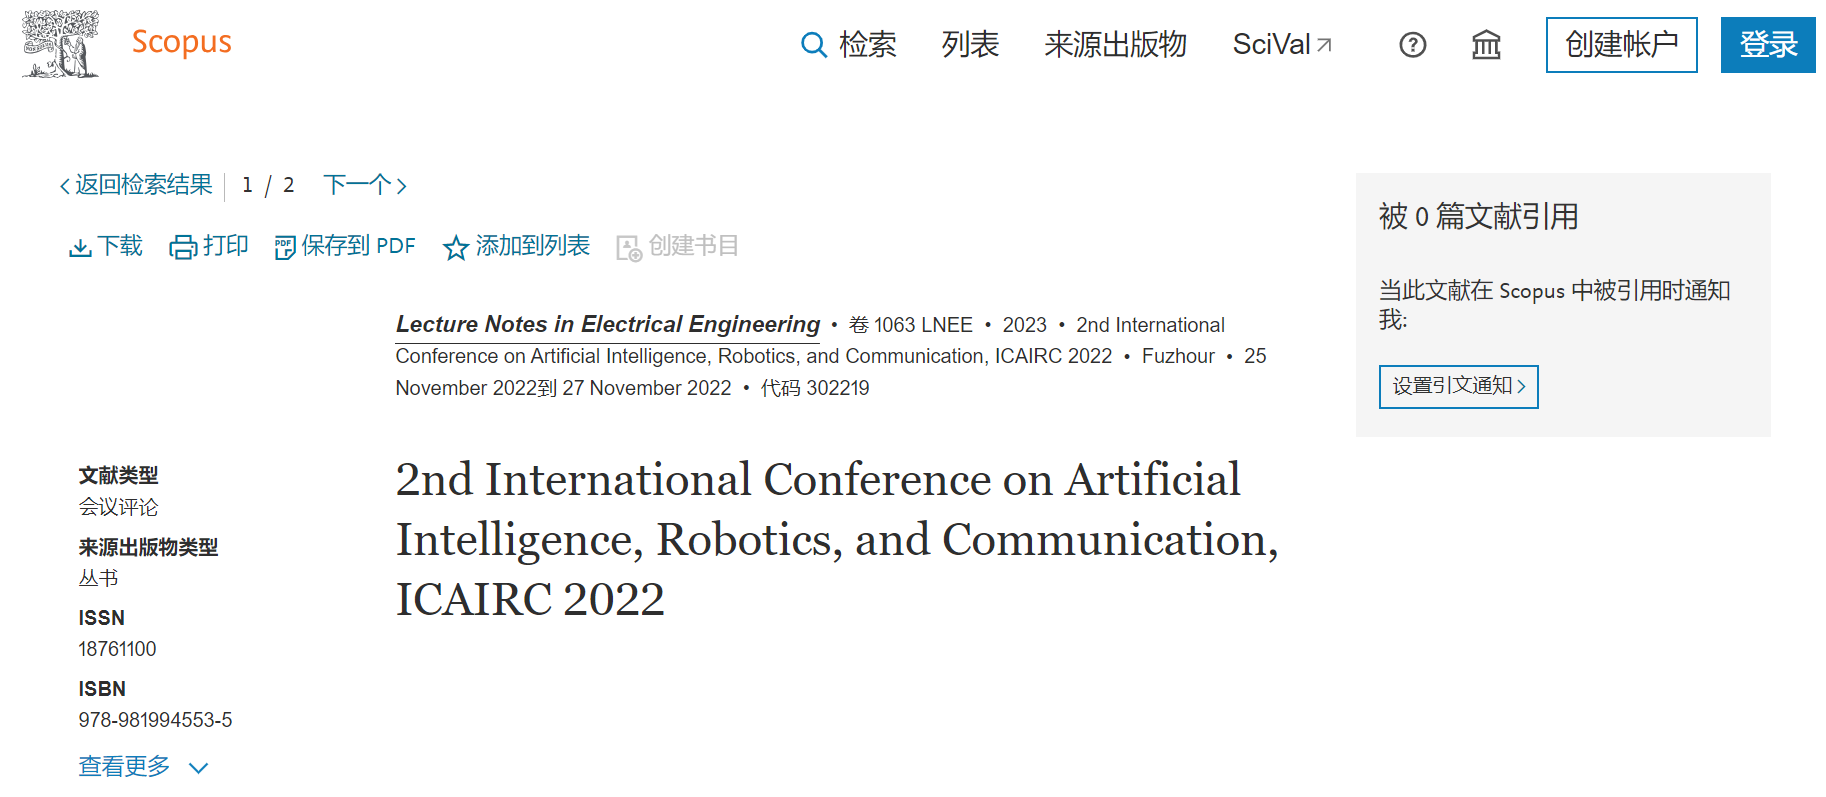 ICAIRC 2022 scopus.png